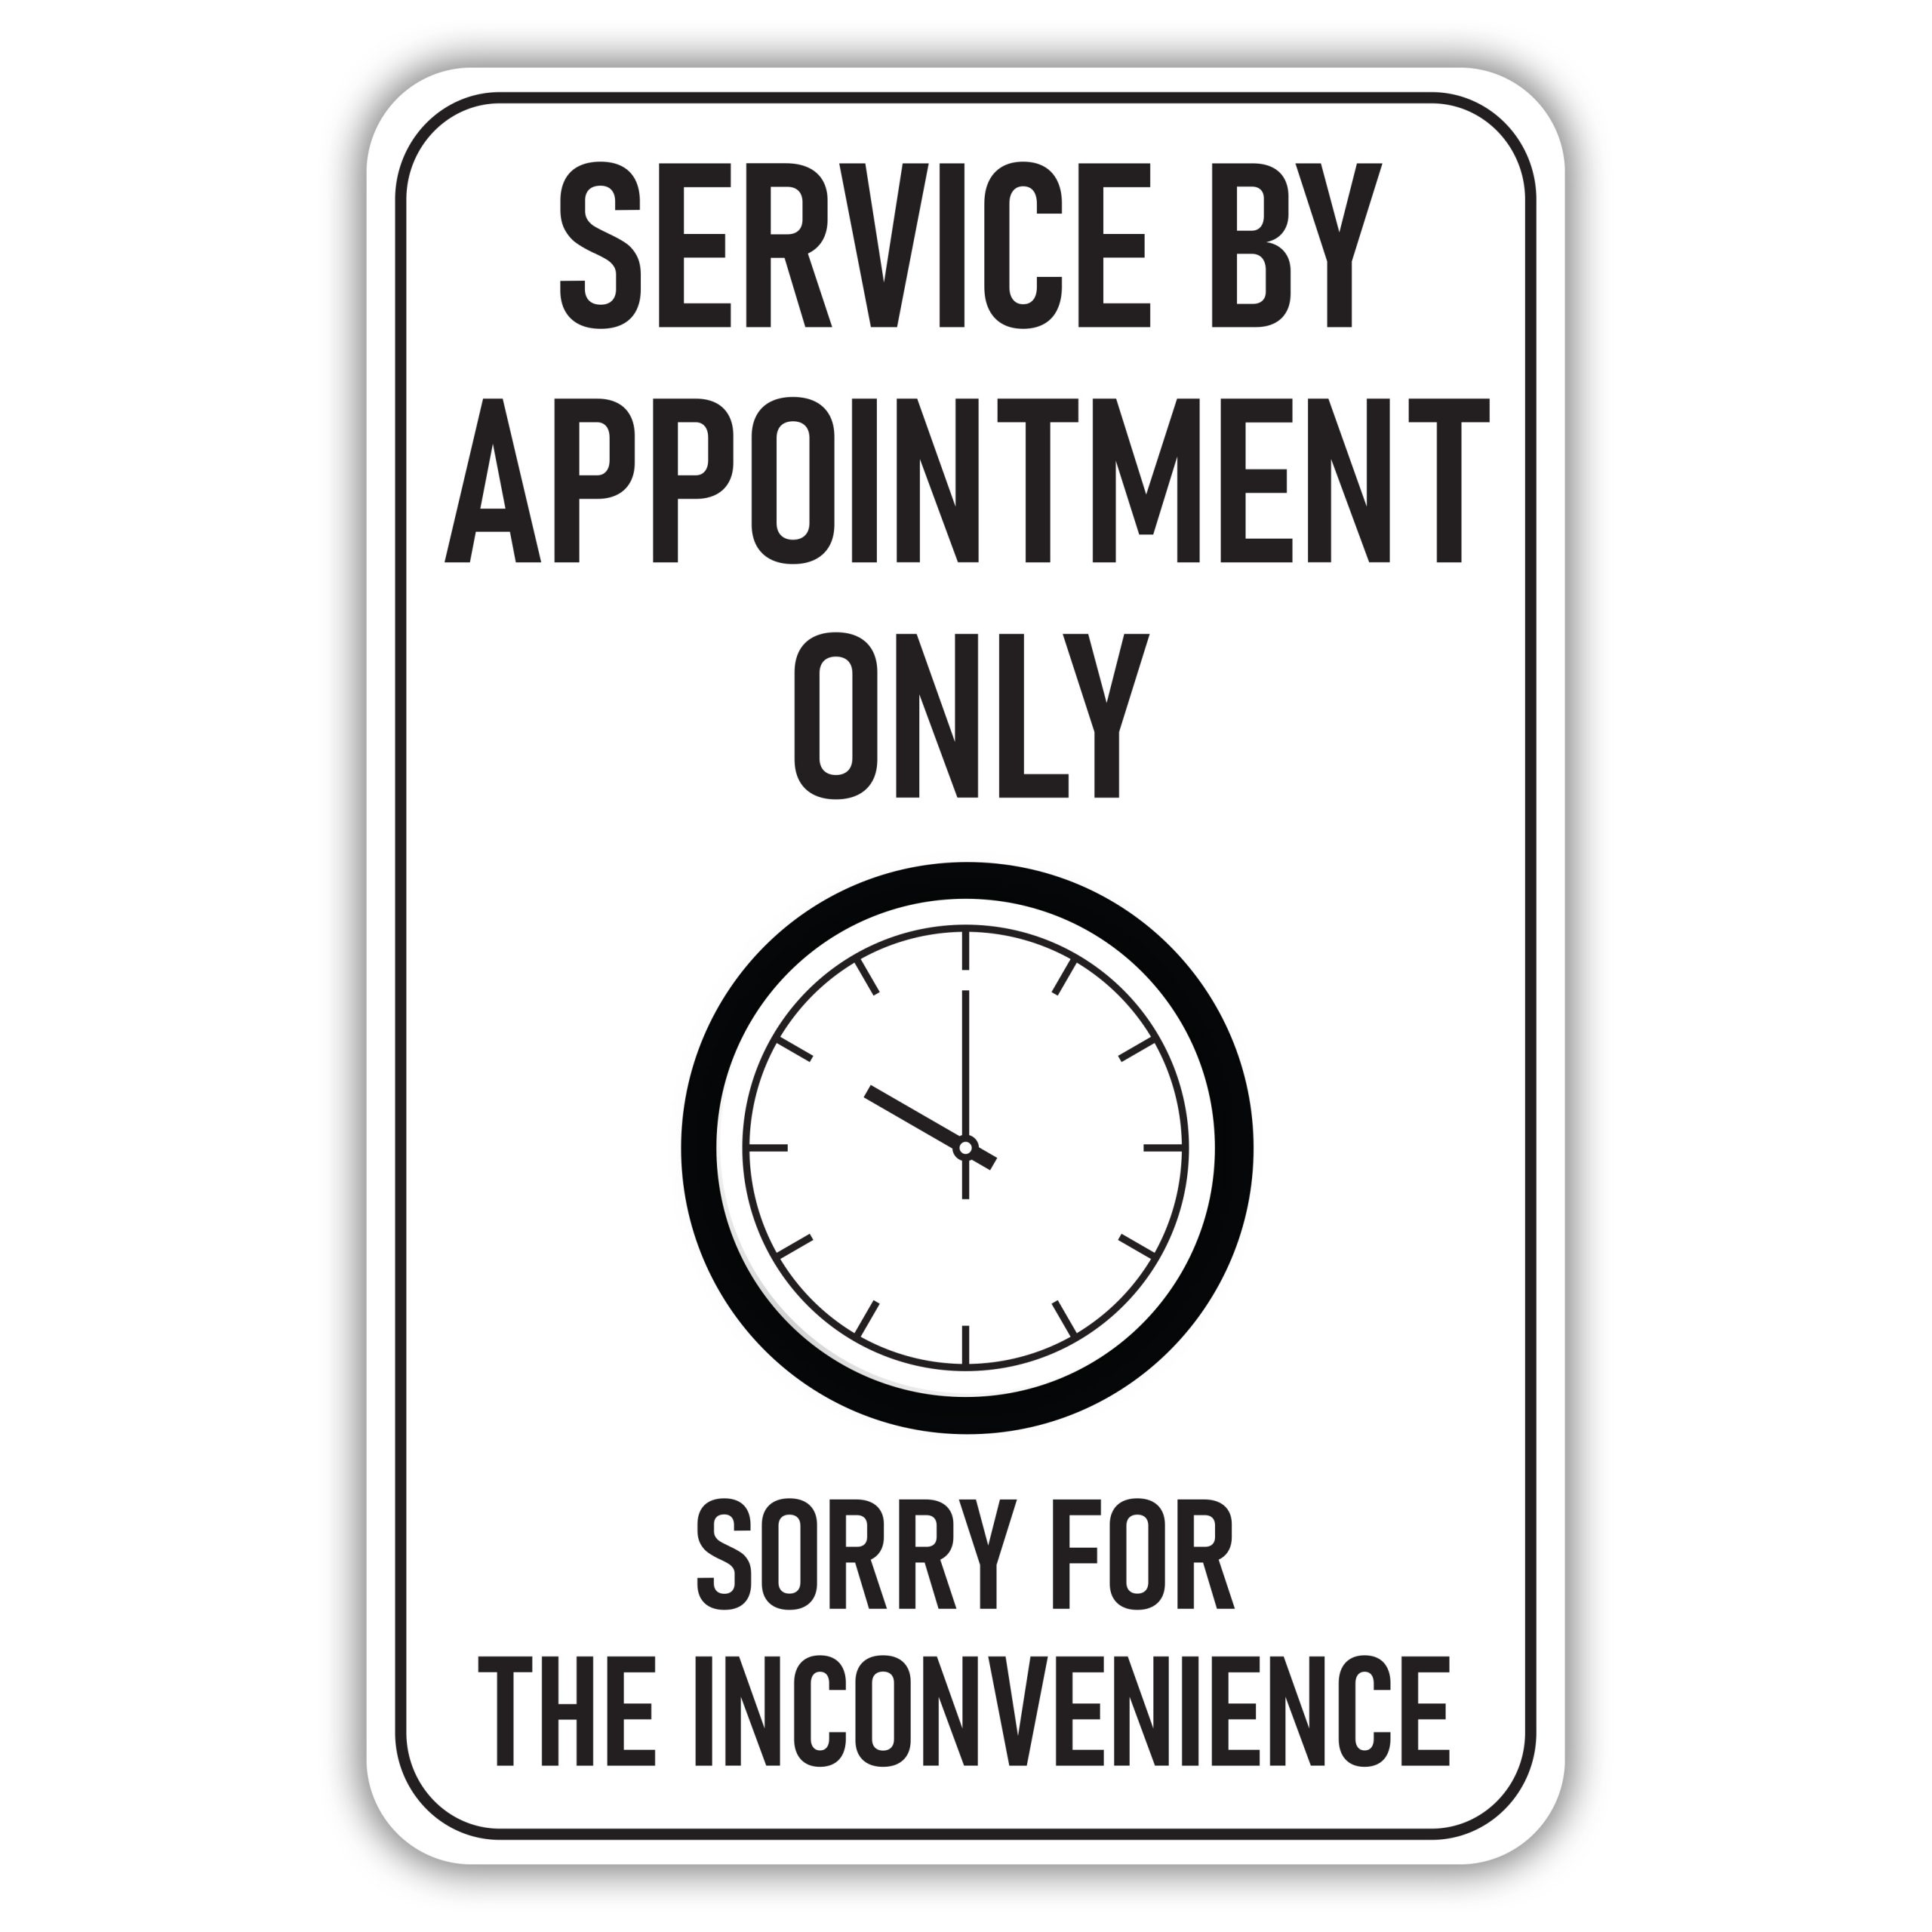 By Appointment Only Sign Printable Free